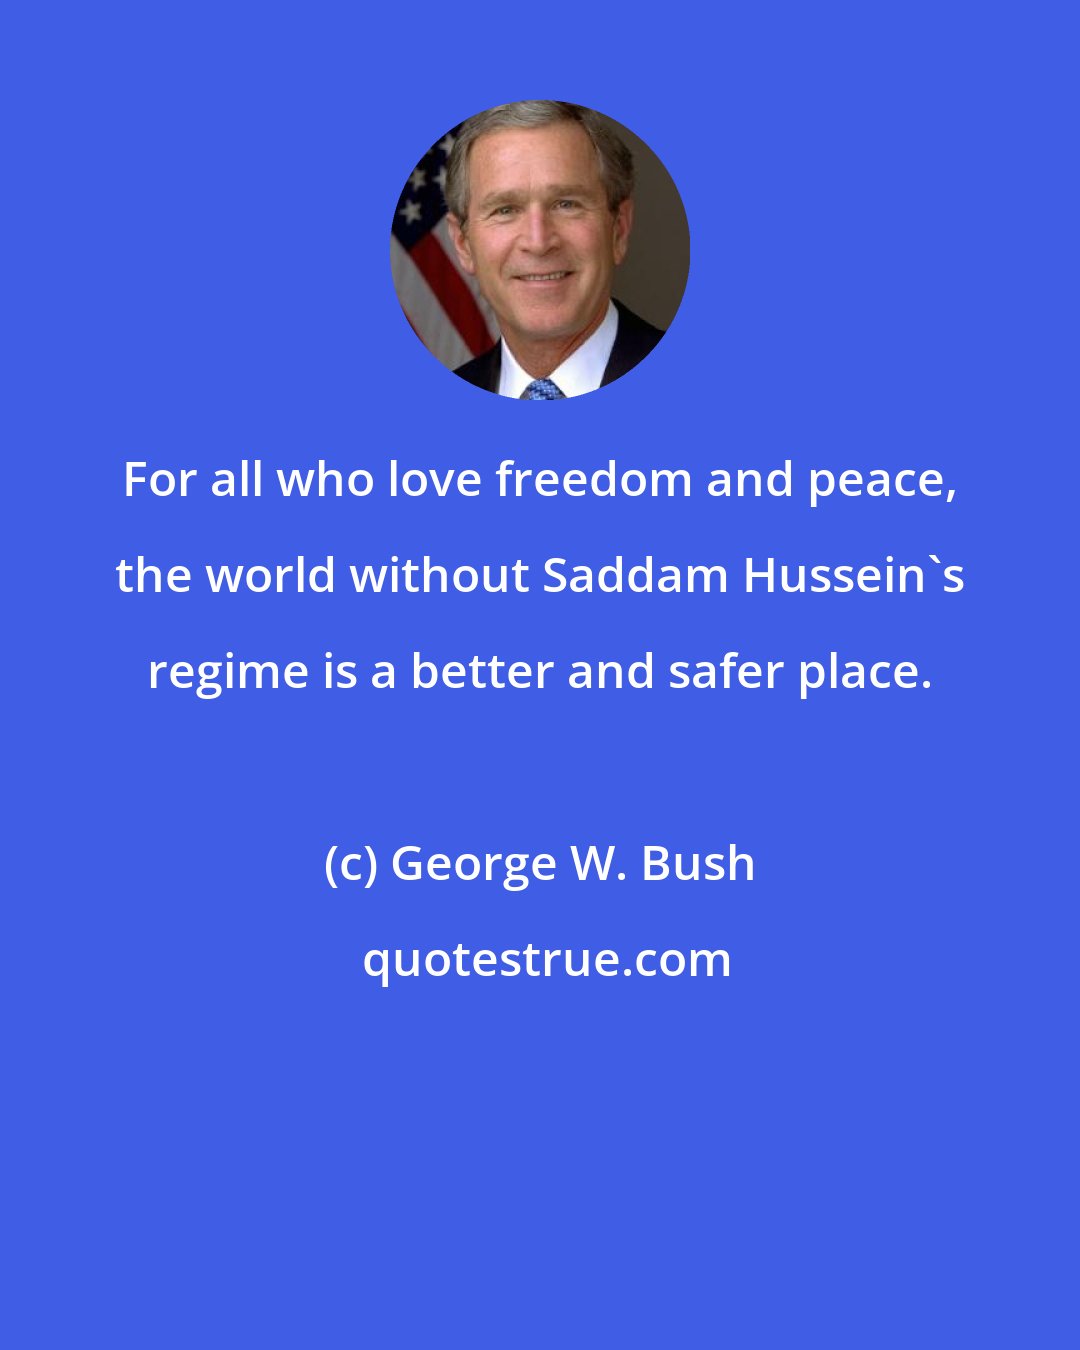 George W. Bush: For all who love freedom and peace, the world without Saddam Hussein's regime is a better and safer place.